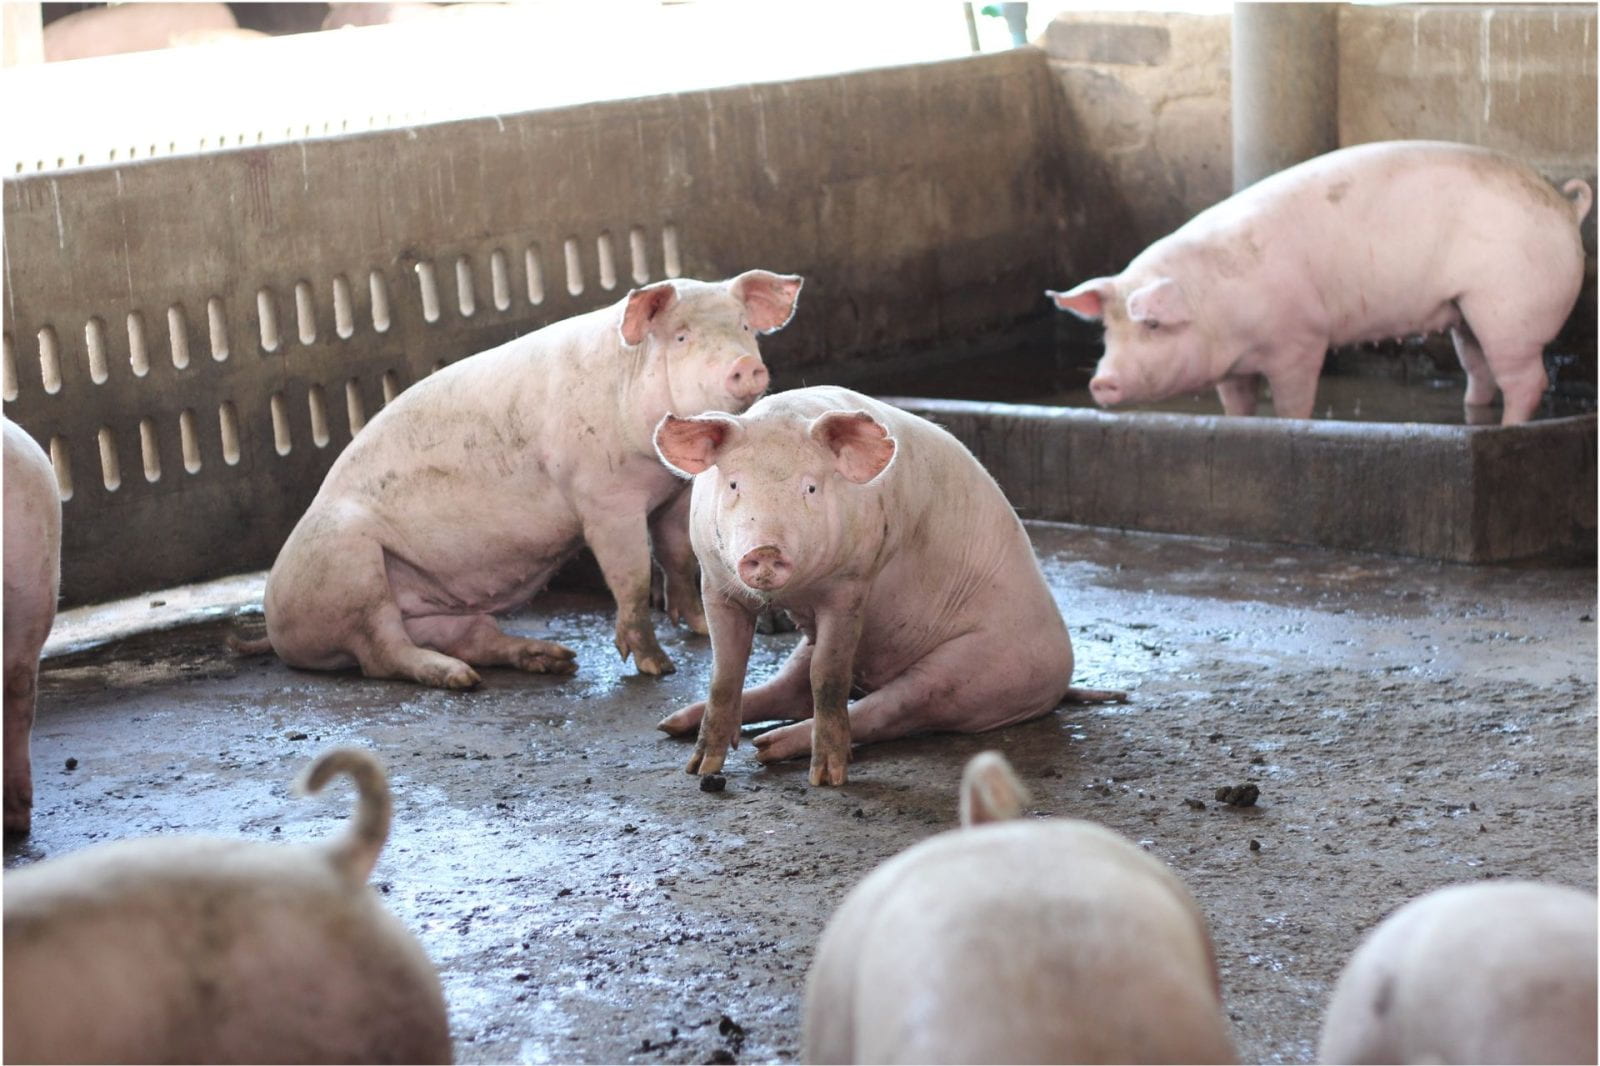 Pigs standing and sitting on a concrete floor